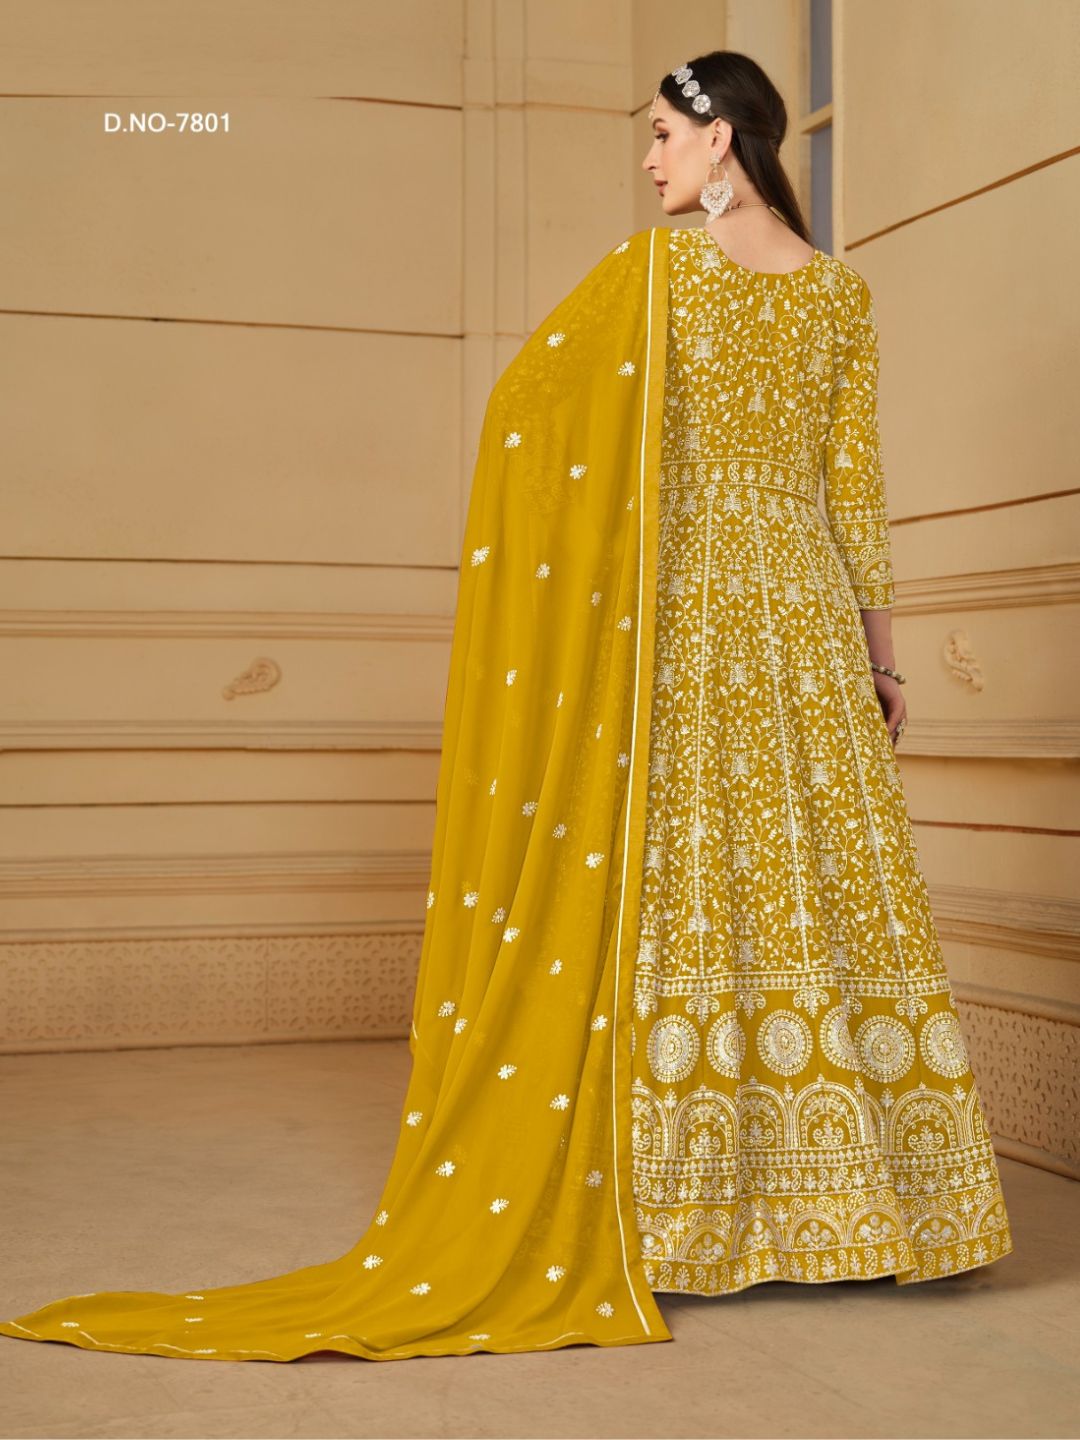 Georgette Embroidered Bollywood Salwar Kameez in Yellow with Stone work-81989